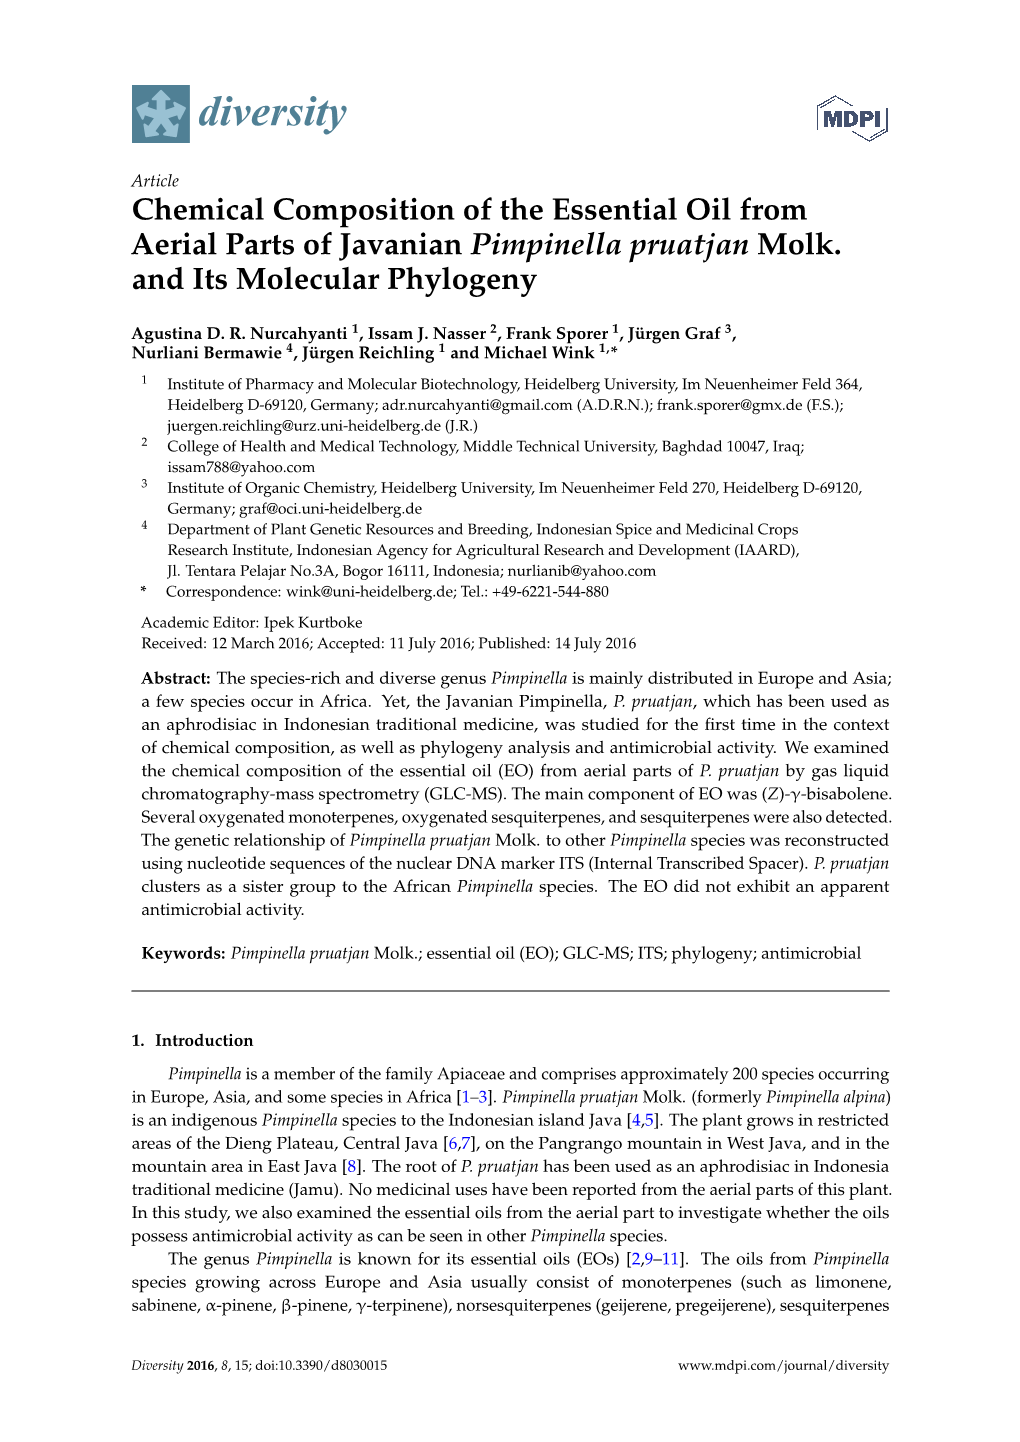 Chemical Composition of the Essential Oil from Aerial Parts of Javanian Pimpinella Pruatjan Molk. and Its Molecular Phylogeny